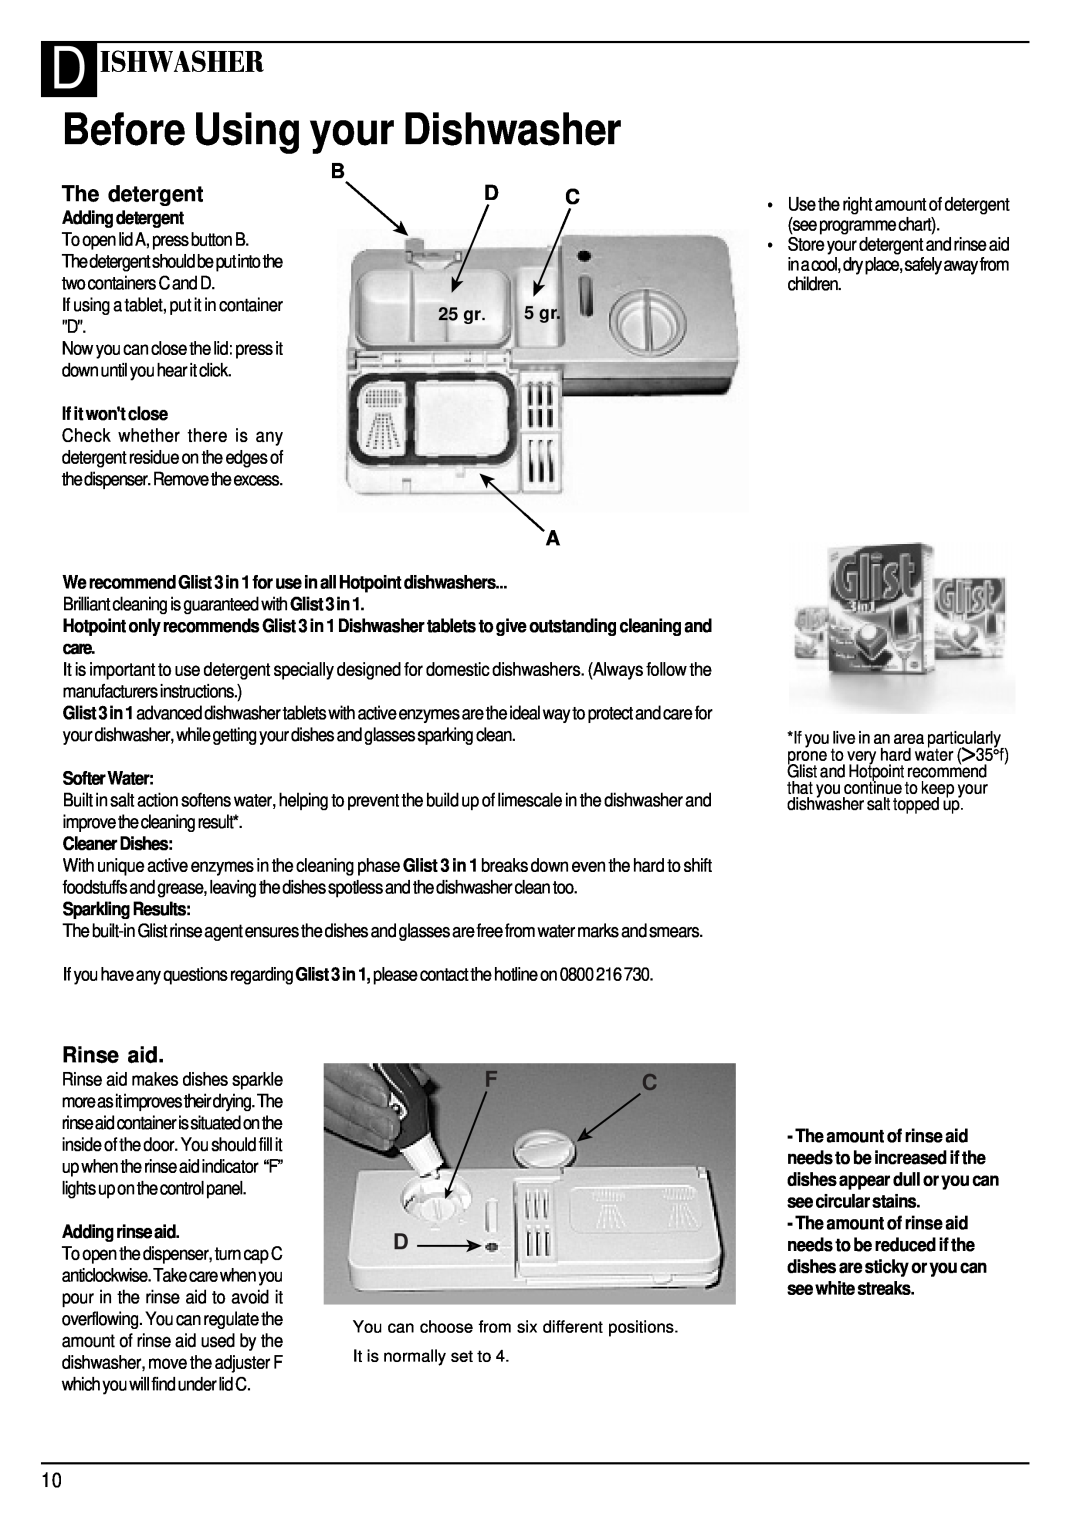 Hotpoint BFT68 manual Before Using your Dishwasher, D Ishwasher, The detergent, Rinse aid, Fc D 